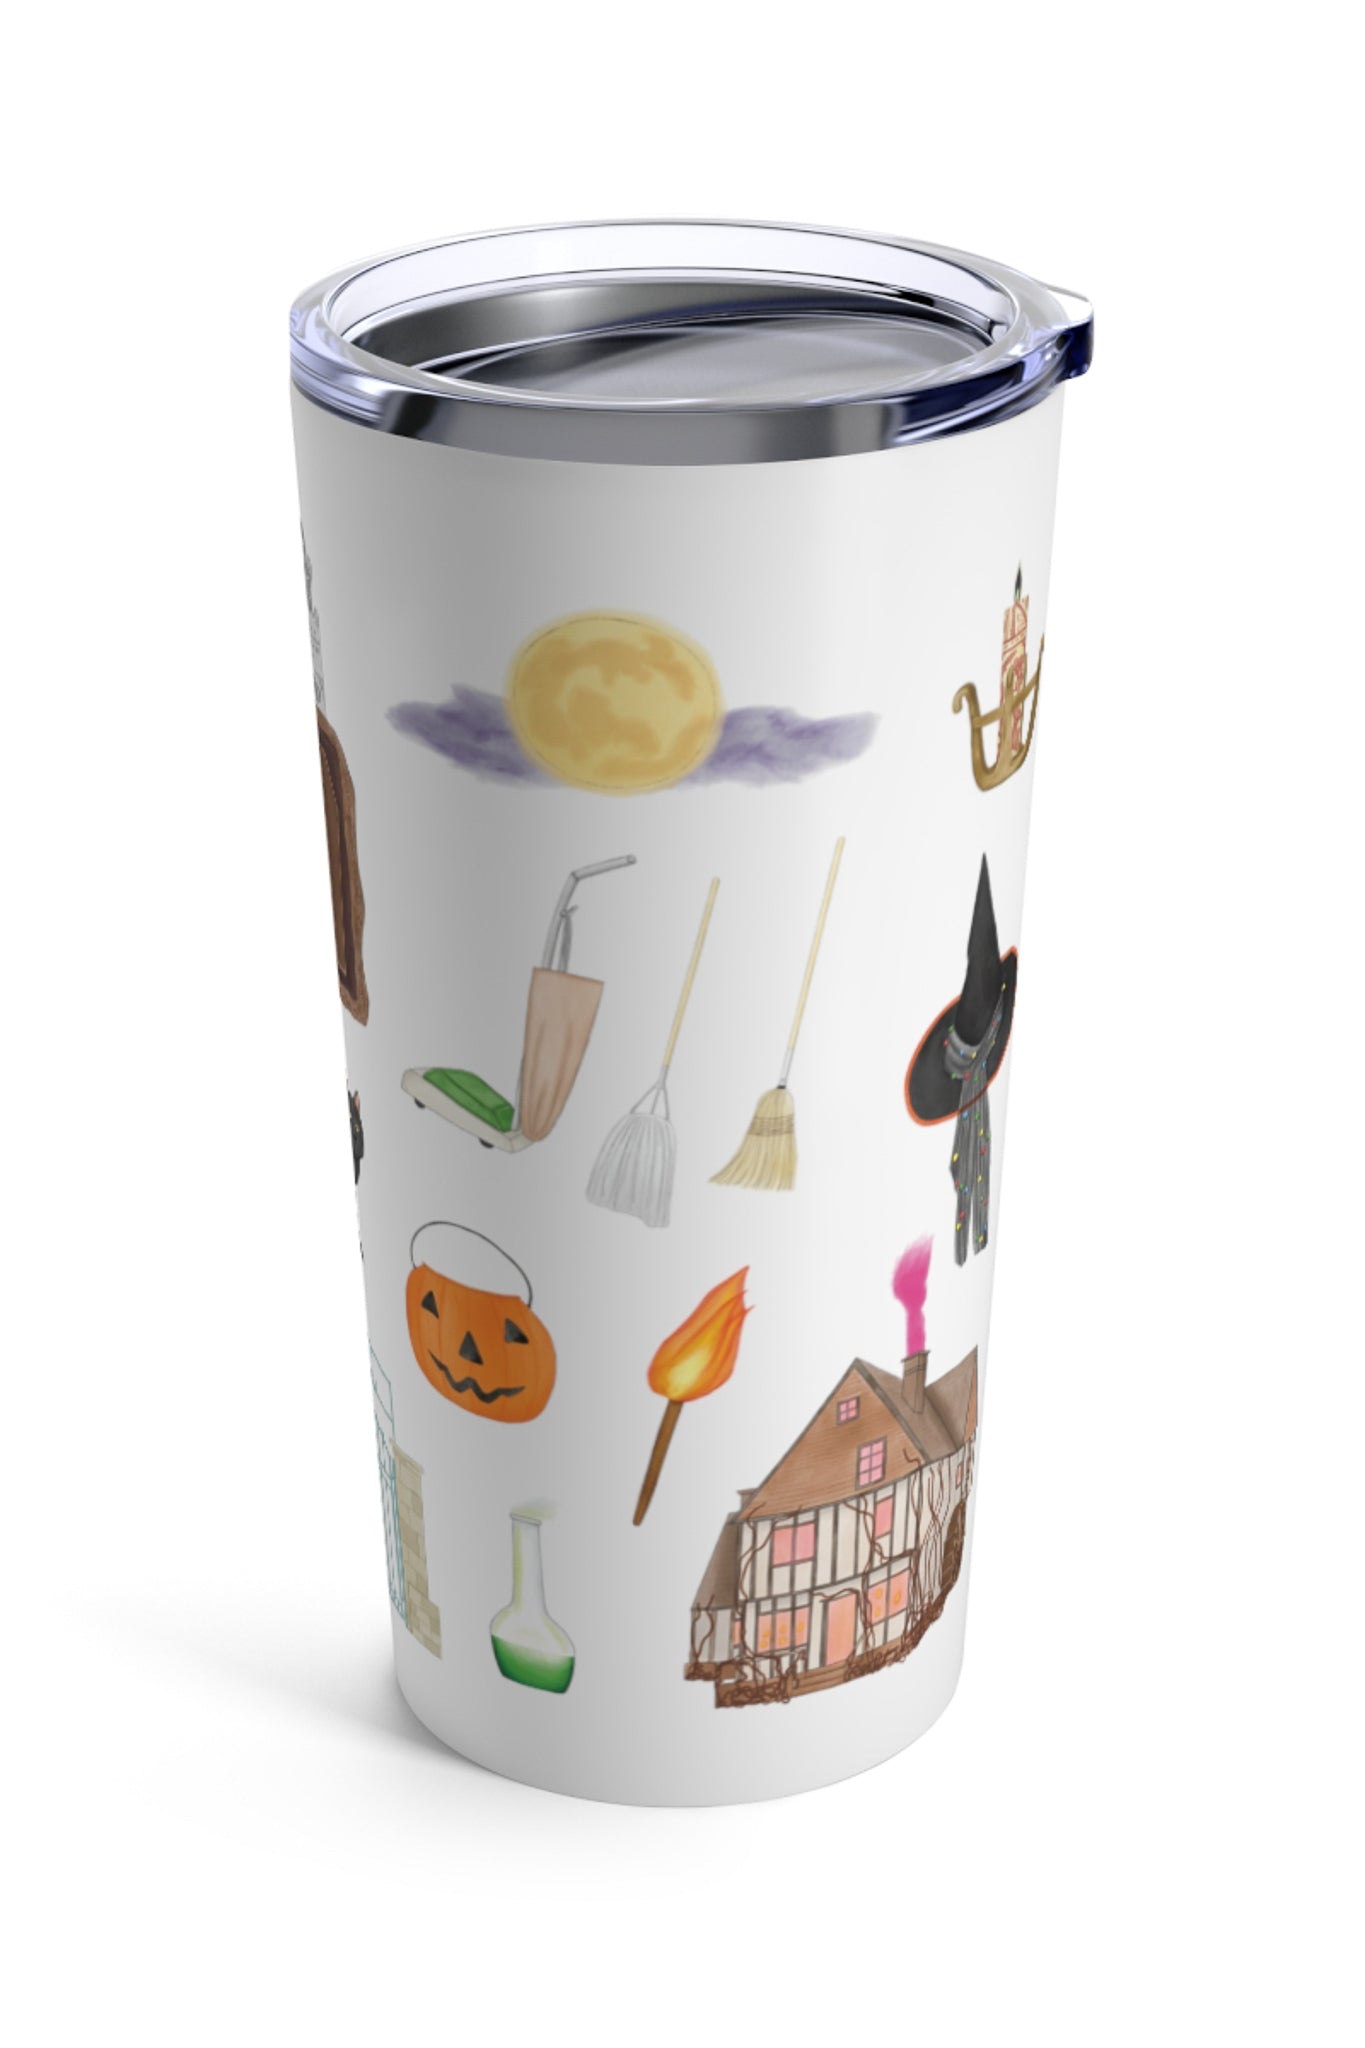 Hocus Pocus tumbler. Hocus Pocus mug. The infamous spell book, the Sanderson Sisters' hairstyles, the cauldron, Old Burial Hill cemetery, Billy Butcherson's headstone, the vacuum, broom, and mop, the black flame candle, Dani's witch hat, Binx the black cat, the Sanderson house